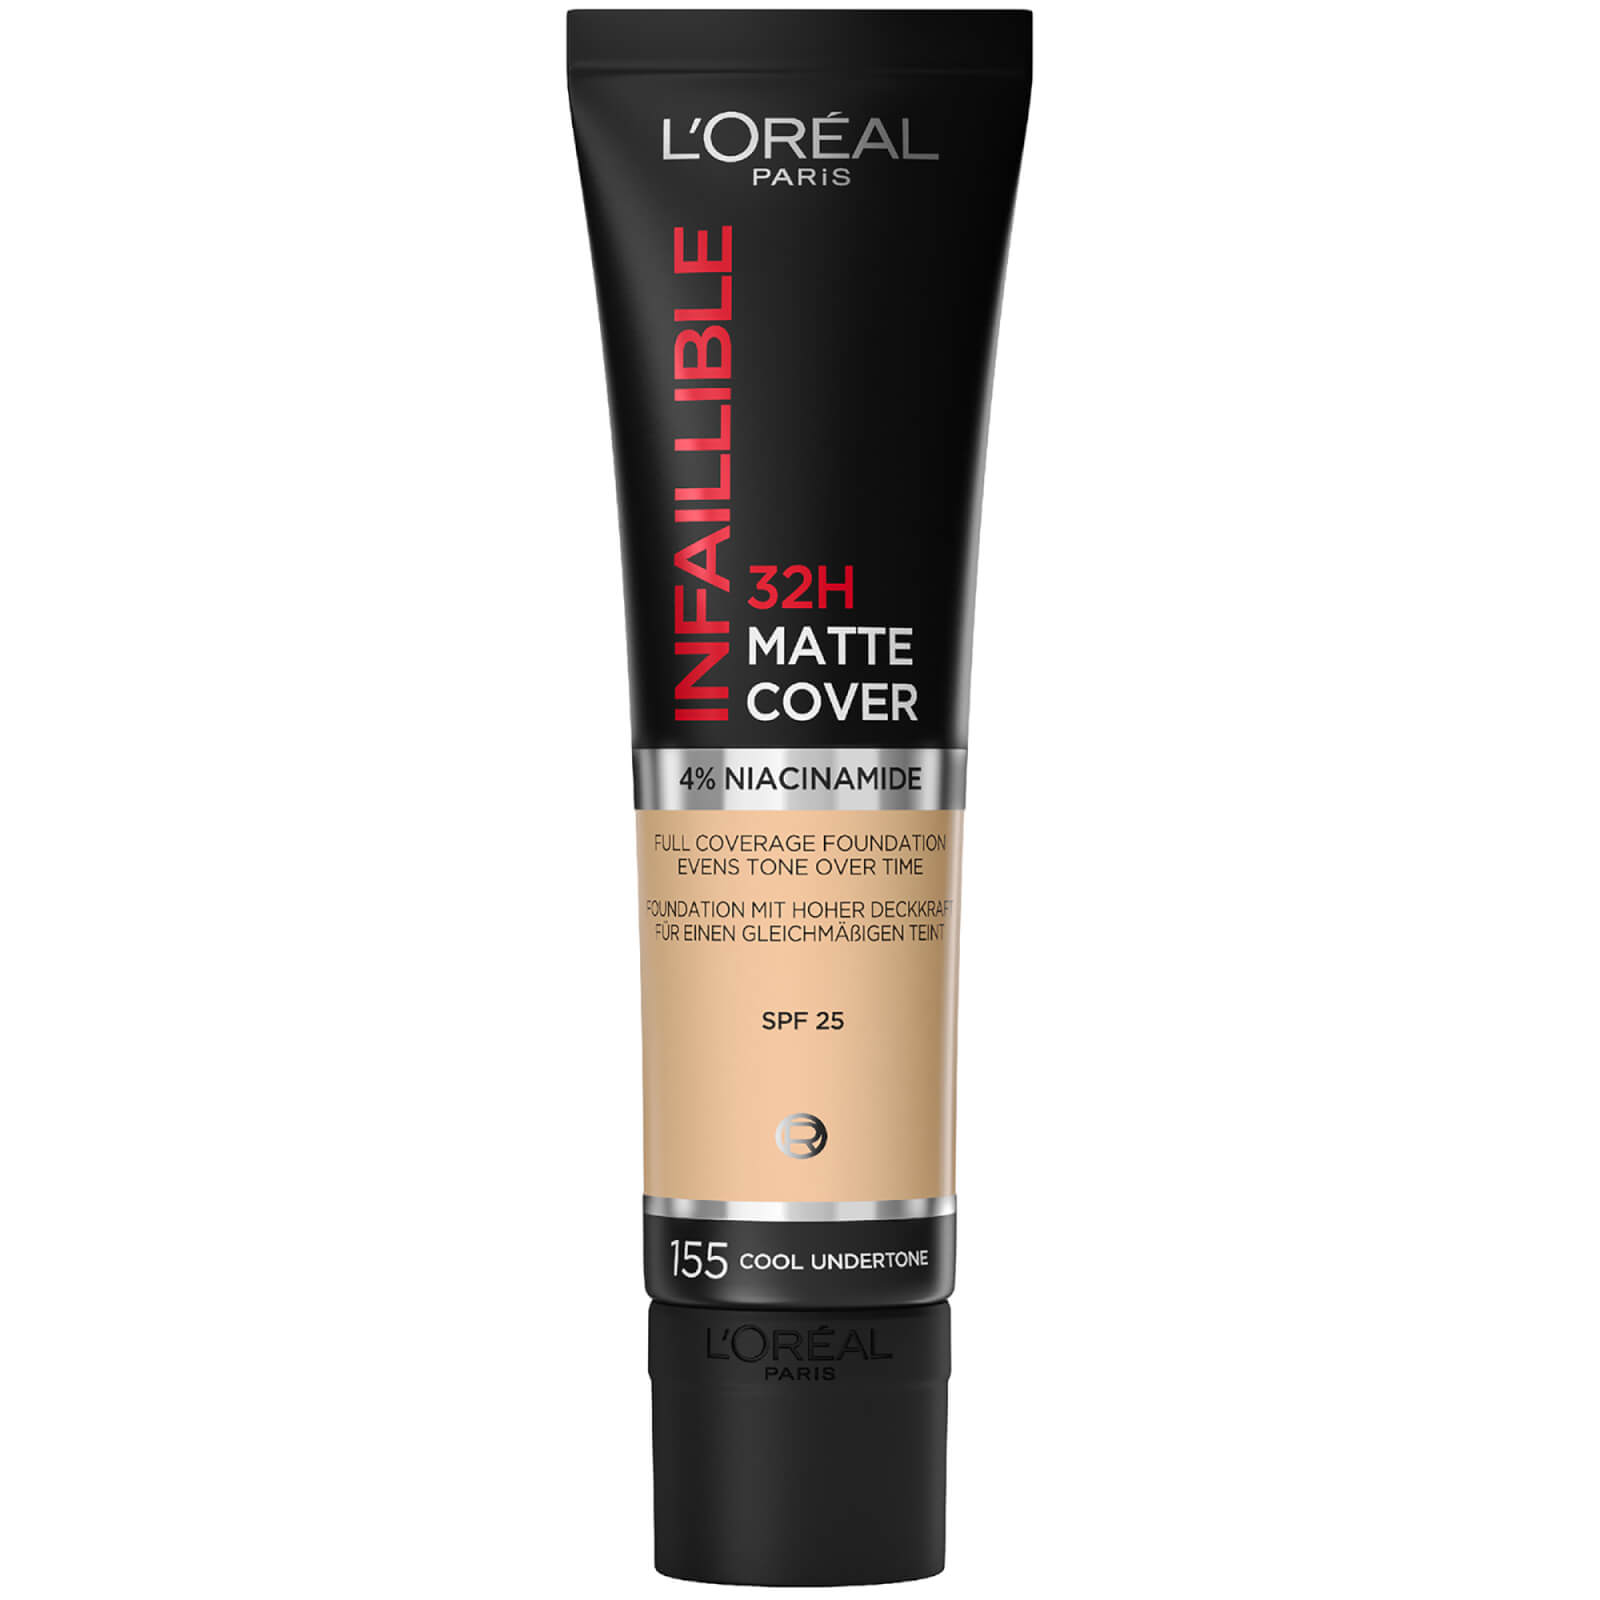 L'Oreal Paris Infallible 32hr Matte Cover Foundation 35ml (Various Shades) - 155 Natural Rose